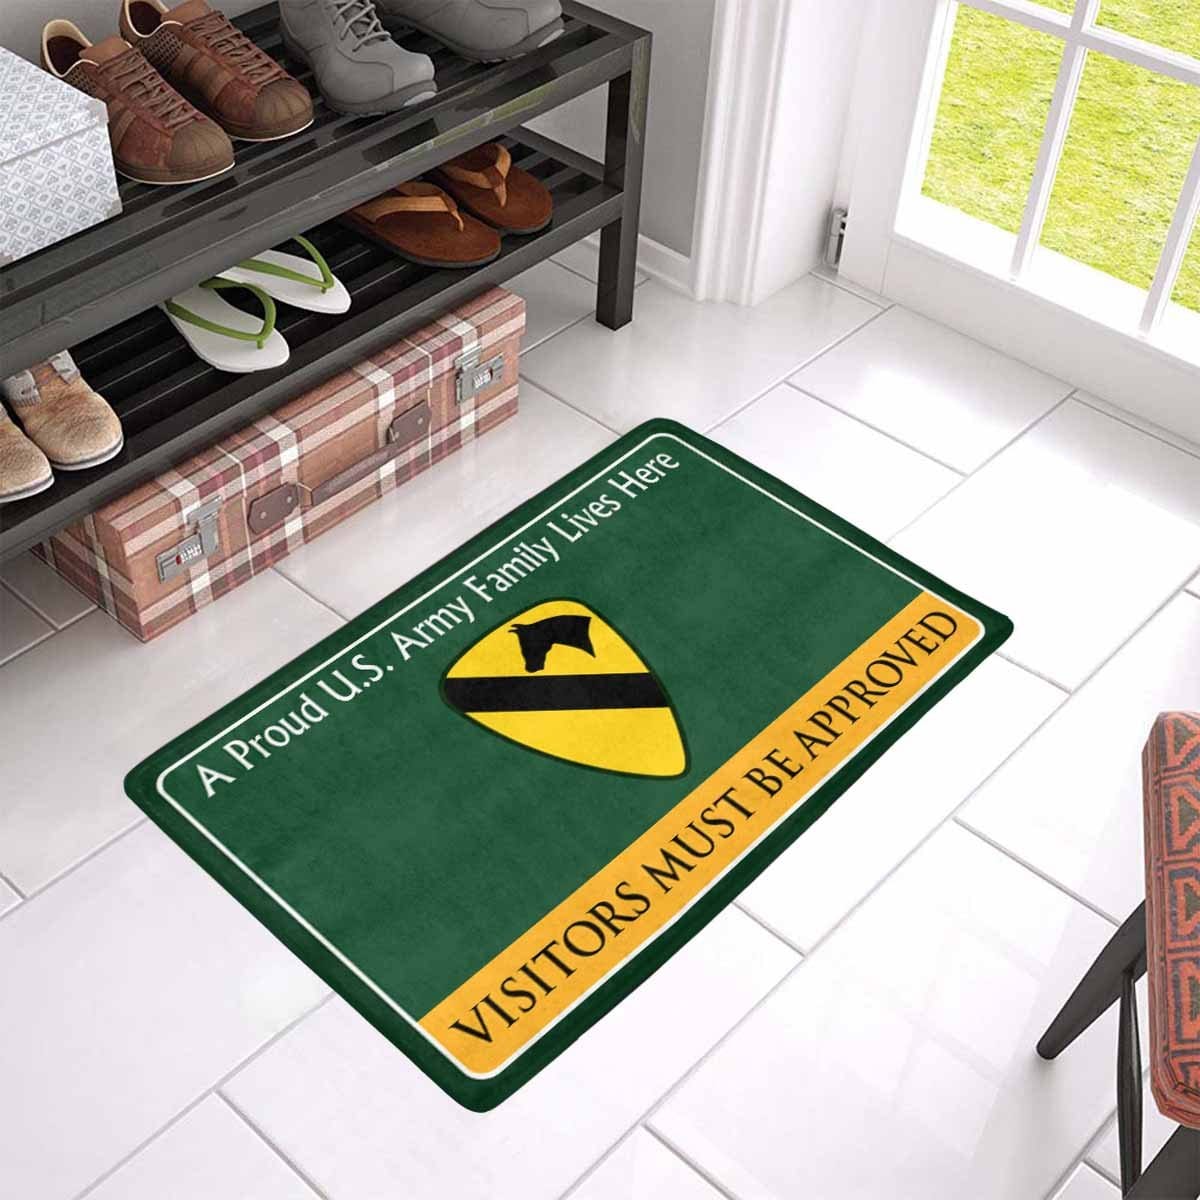 US Army Army 1st Cavalry Division Family Doormat - Visitors must be approved Doormat (23.6 inches x 15.7 inches)-Doormat-Army-Branch-Veterans Nation